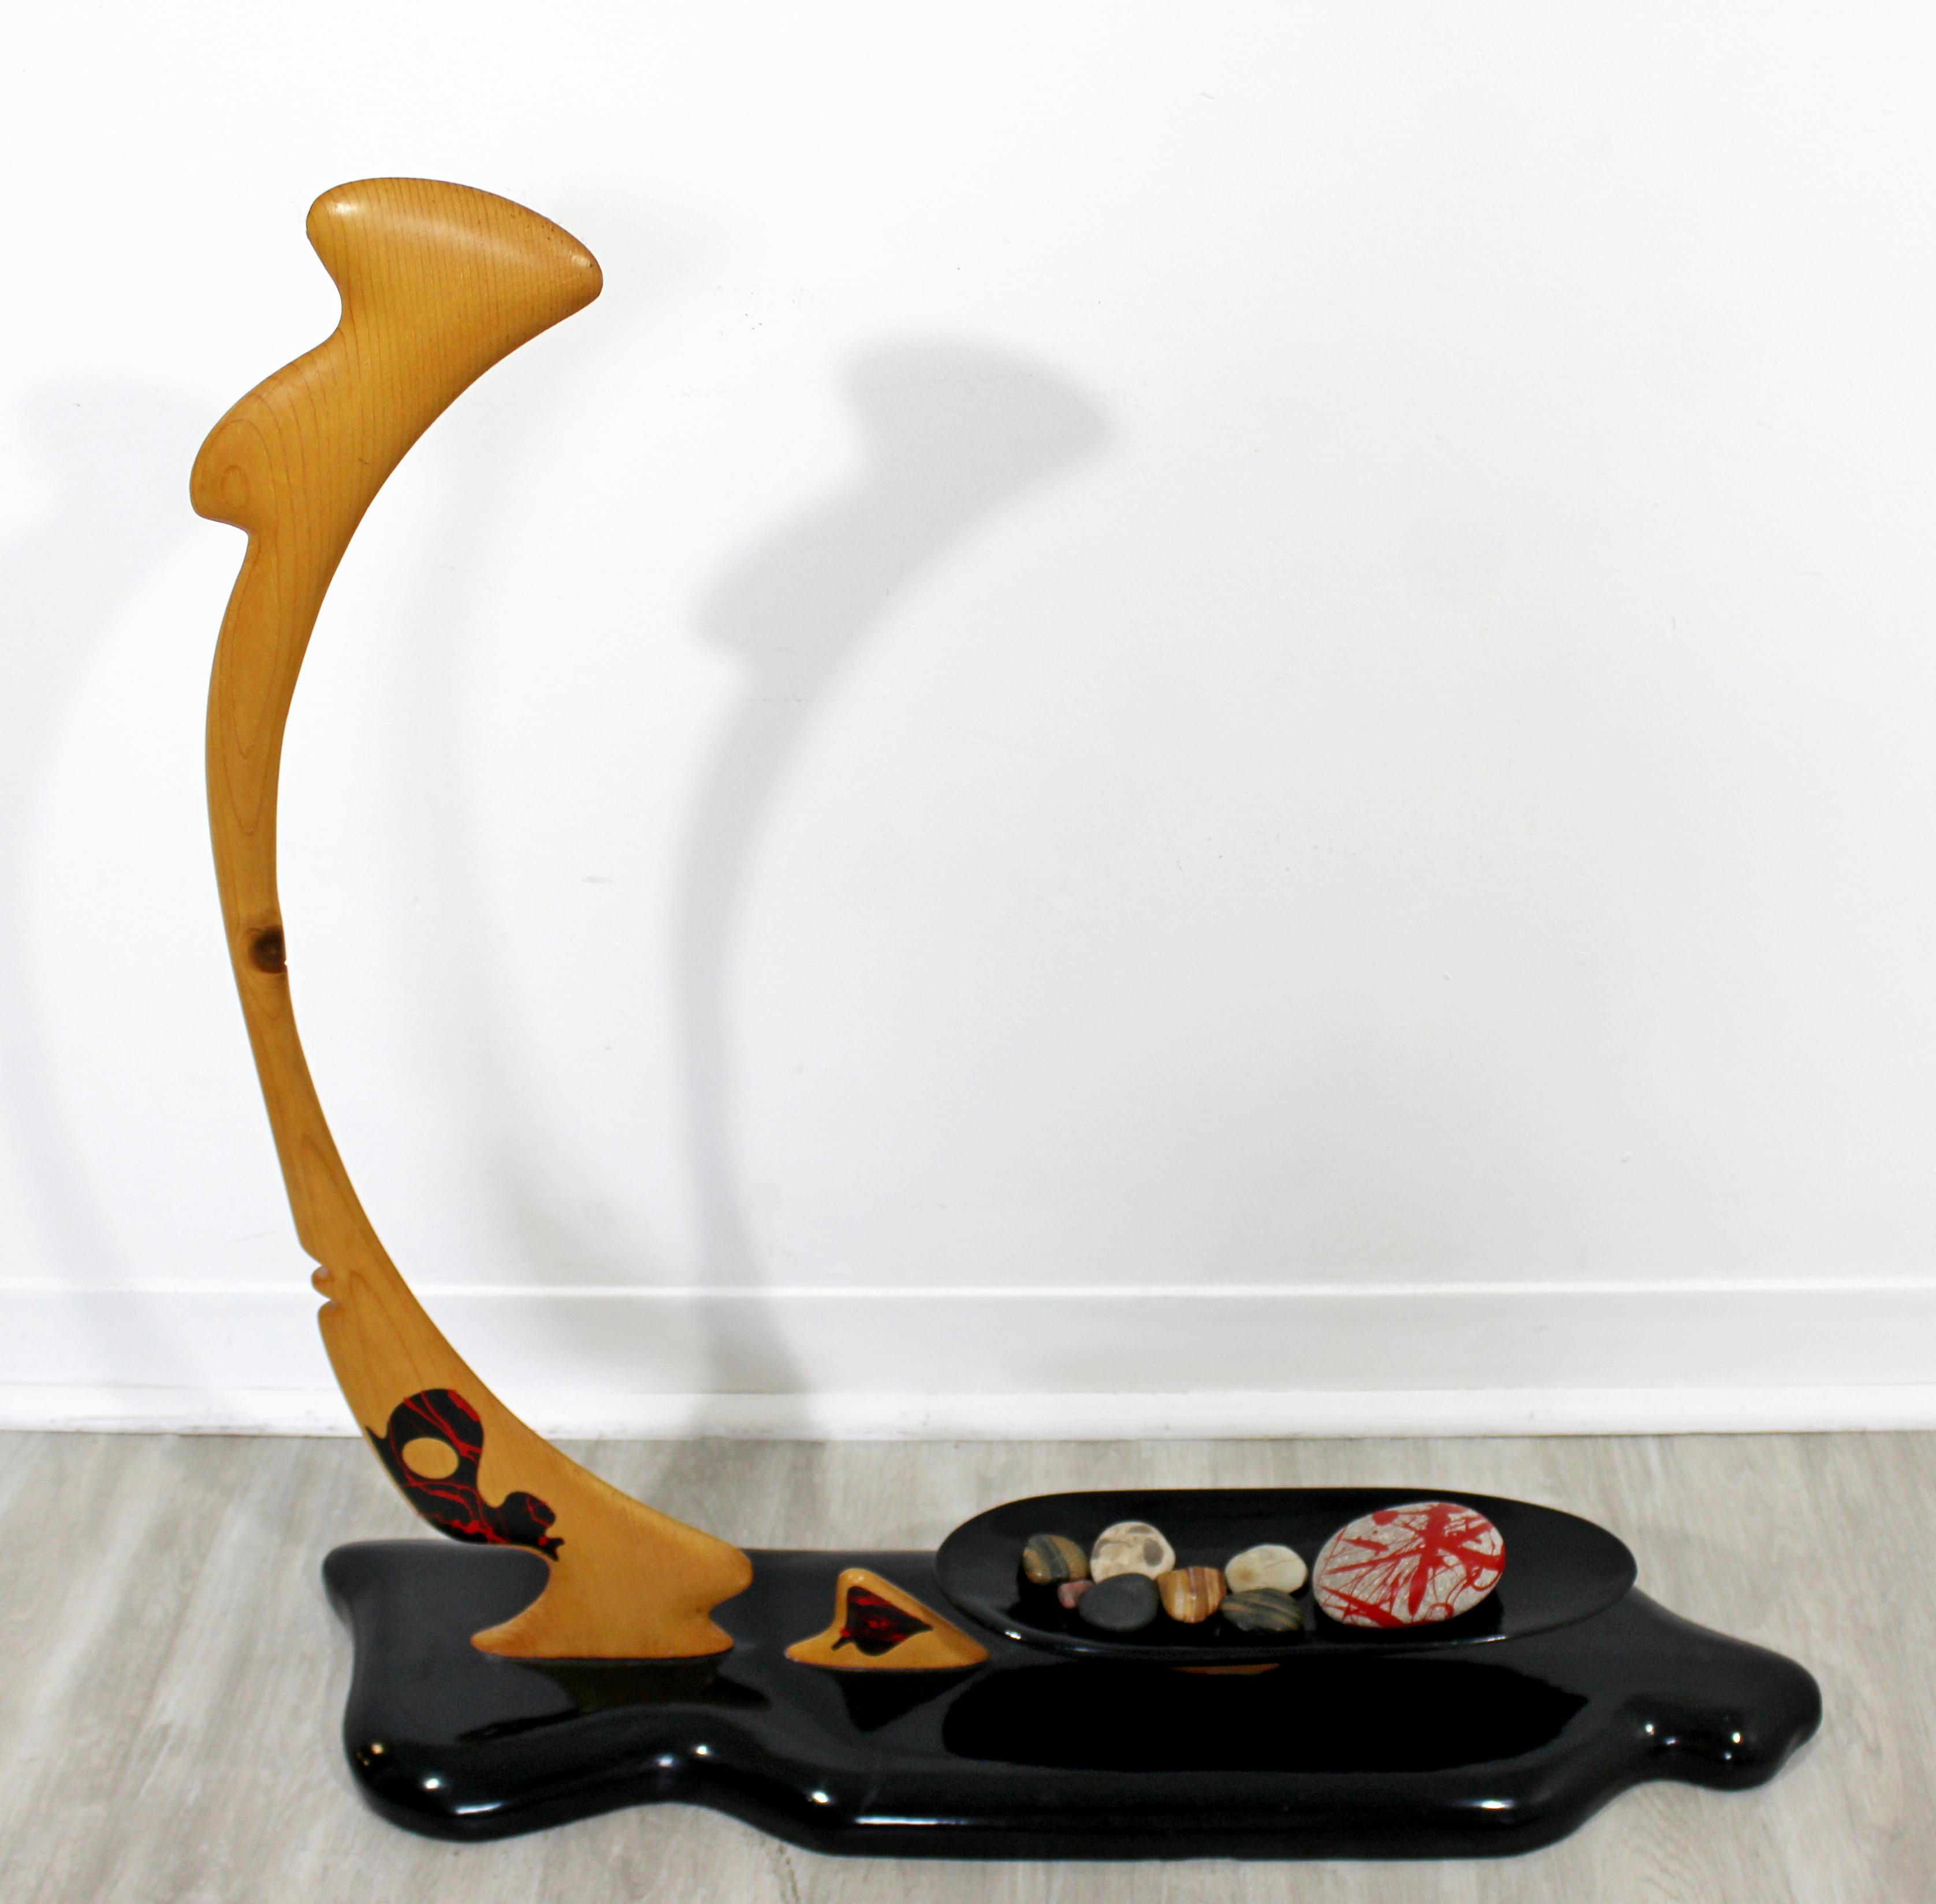 For your consideration is an African stone tribute, painted wood figurative table sculpture, by Matthew Schellenberg. In excellent condition. The dimensions are 30